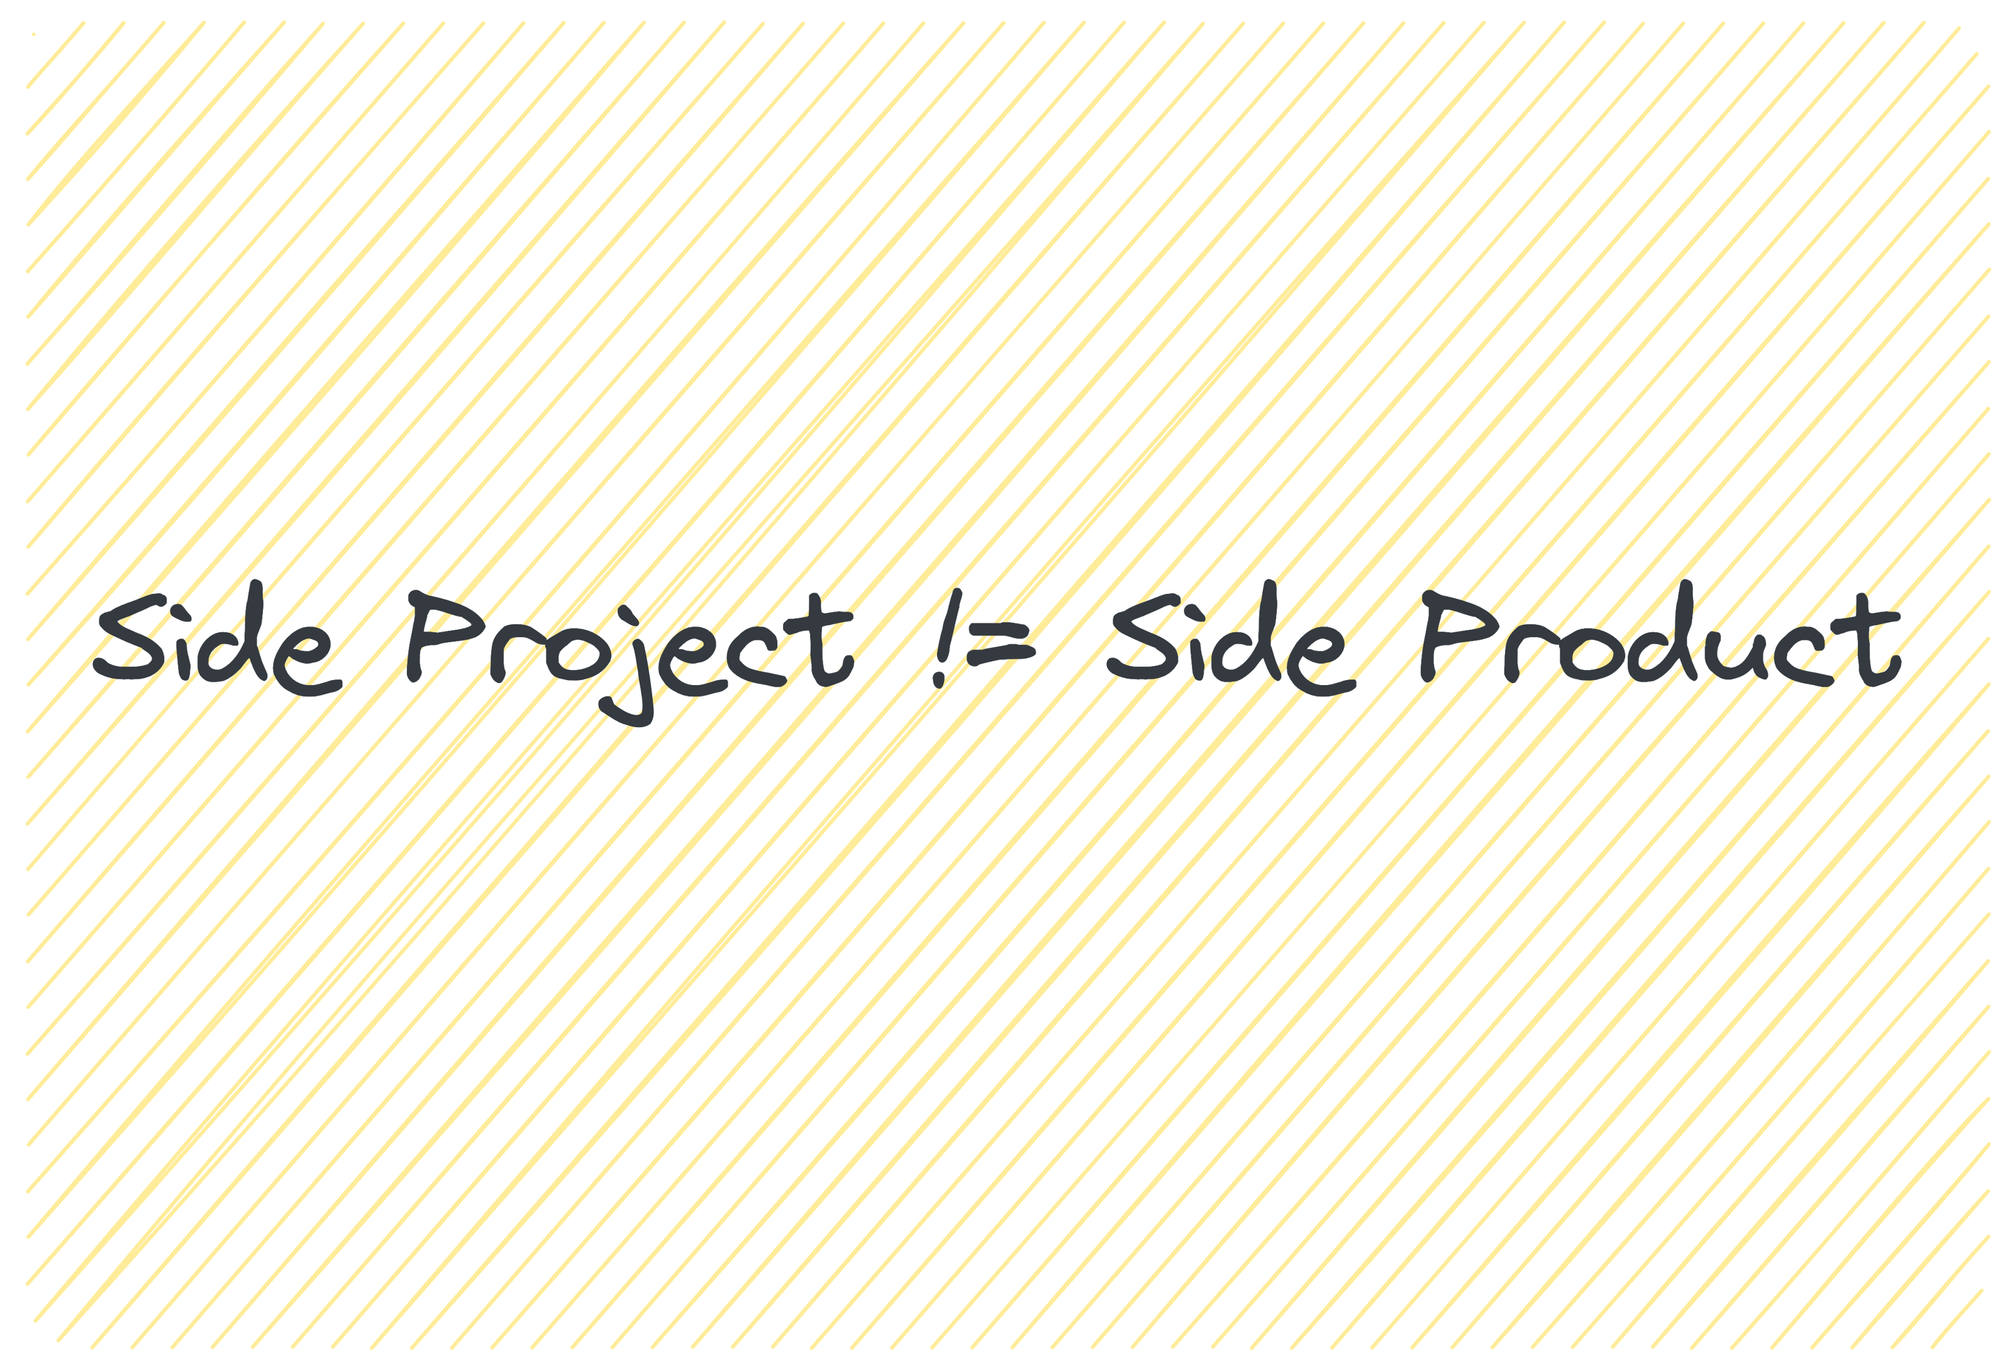 From Side Projects to Side Products: The required Shift in Perspective for Aspiring Indie Hackers